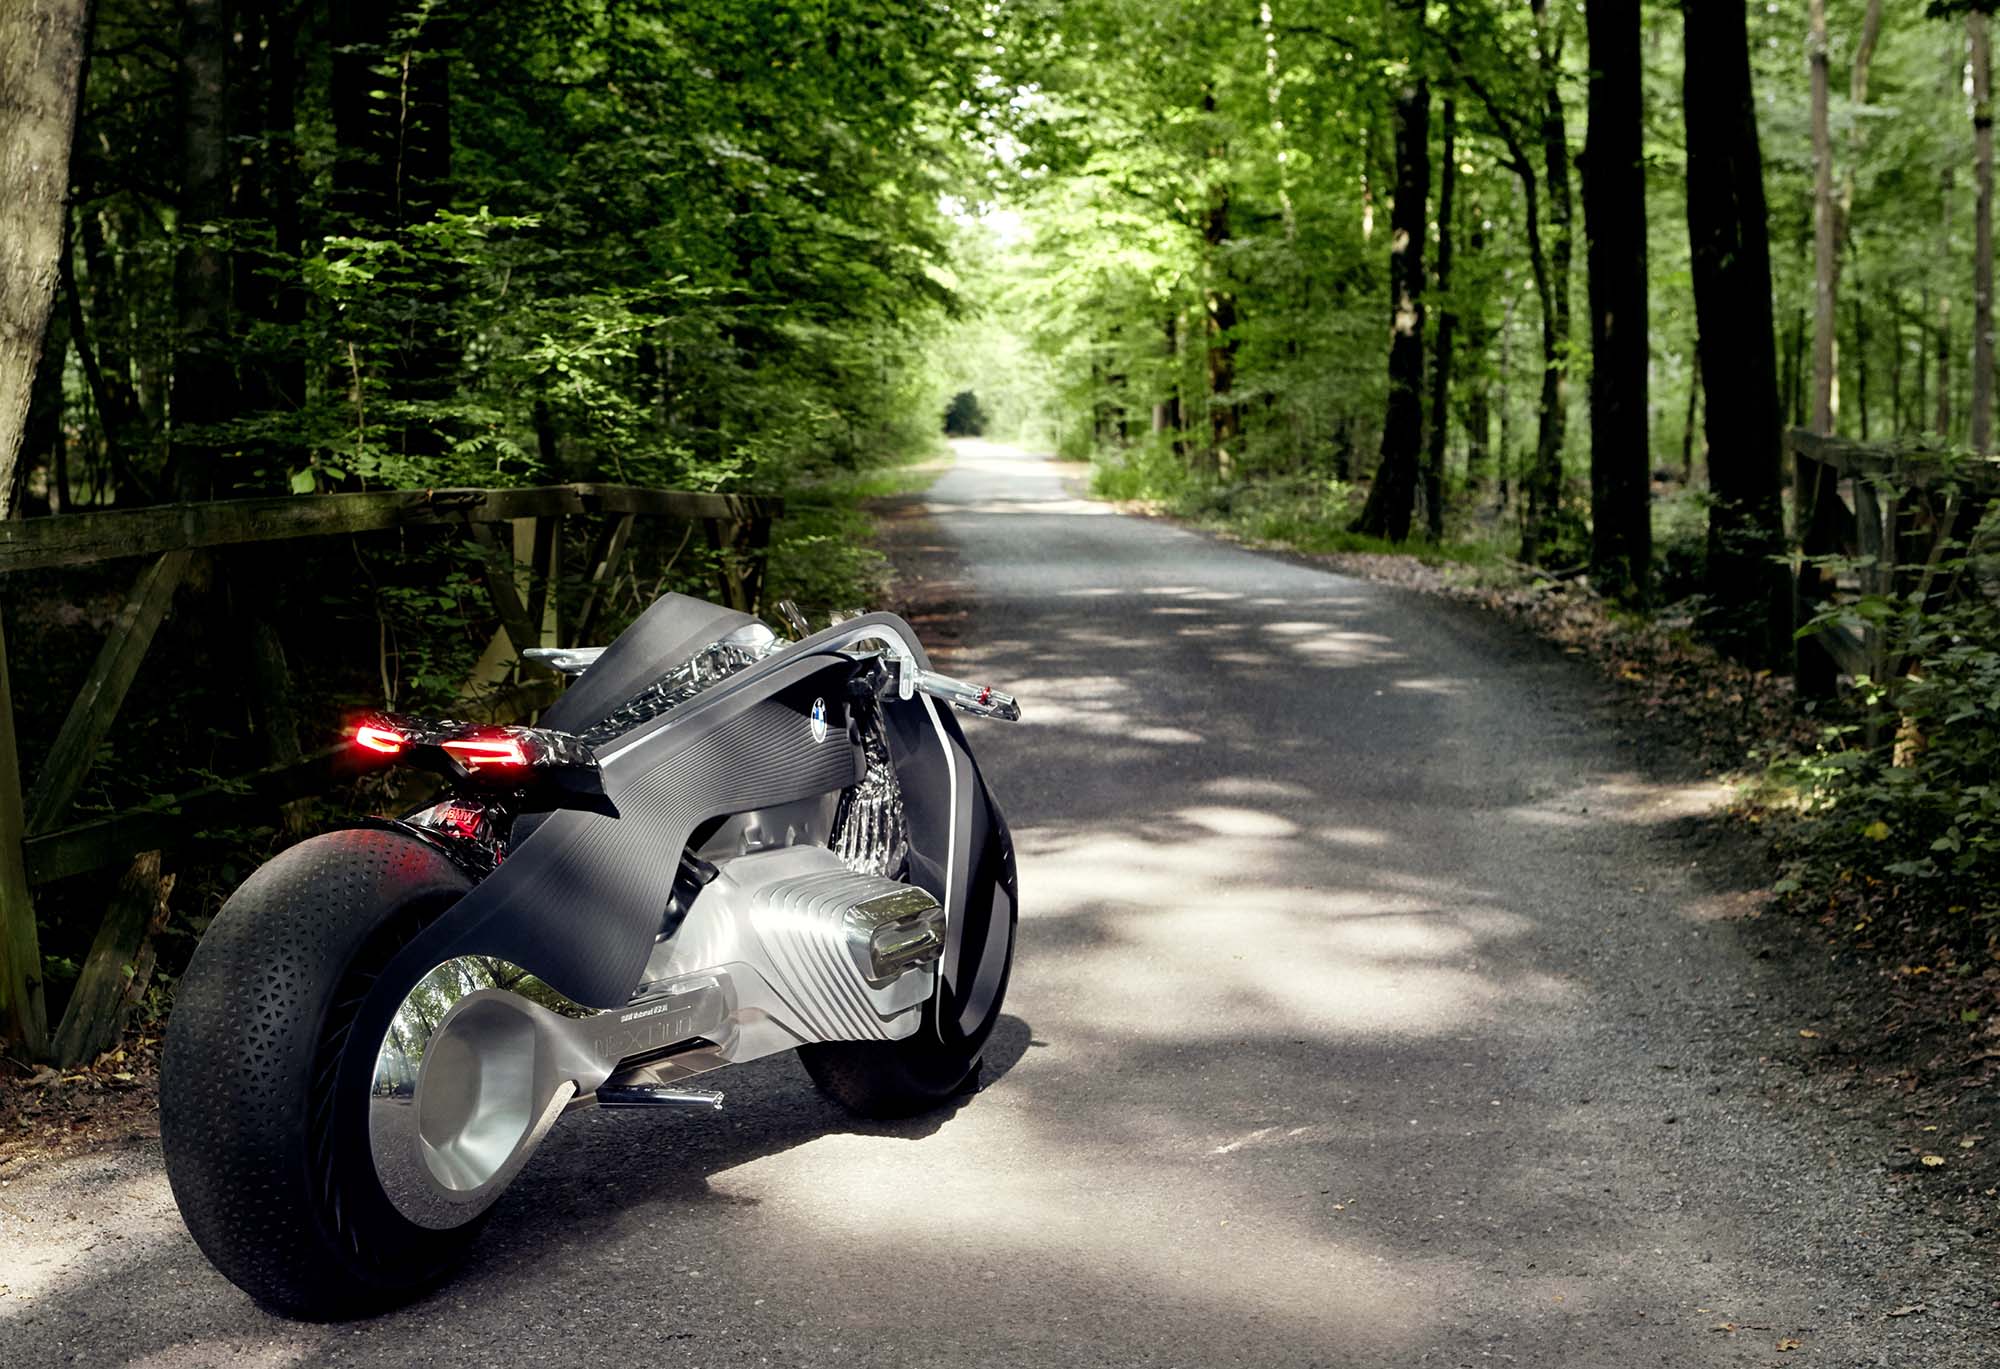 BMW VISION NEXT 100 Concept is the Future of Motorcycles